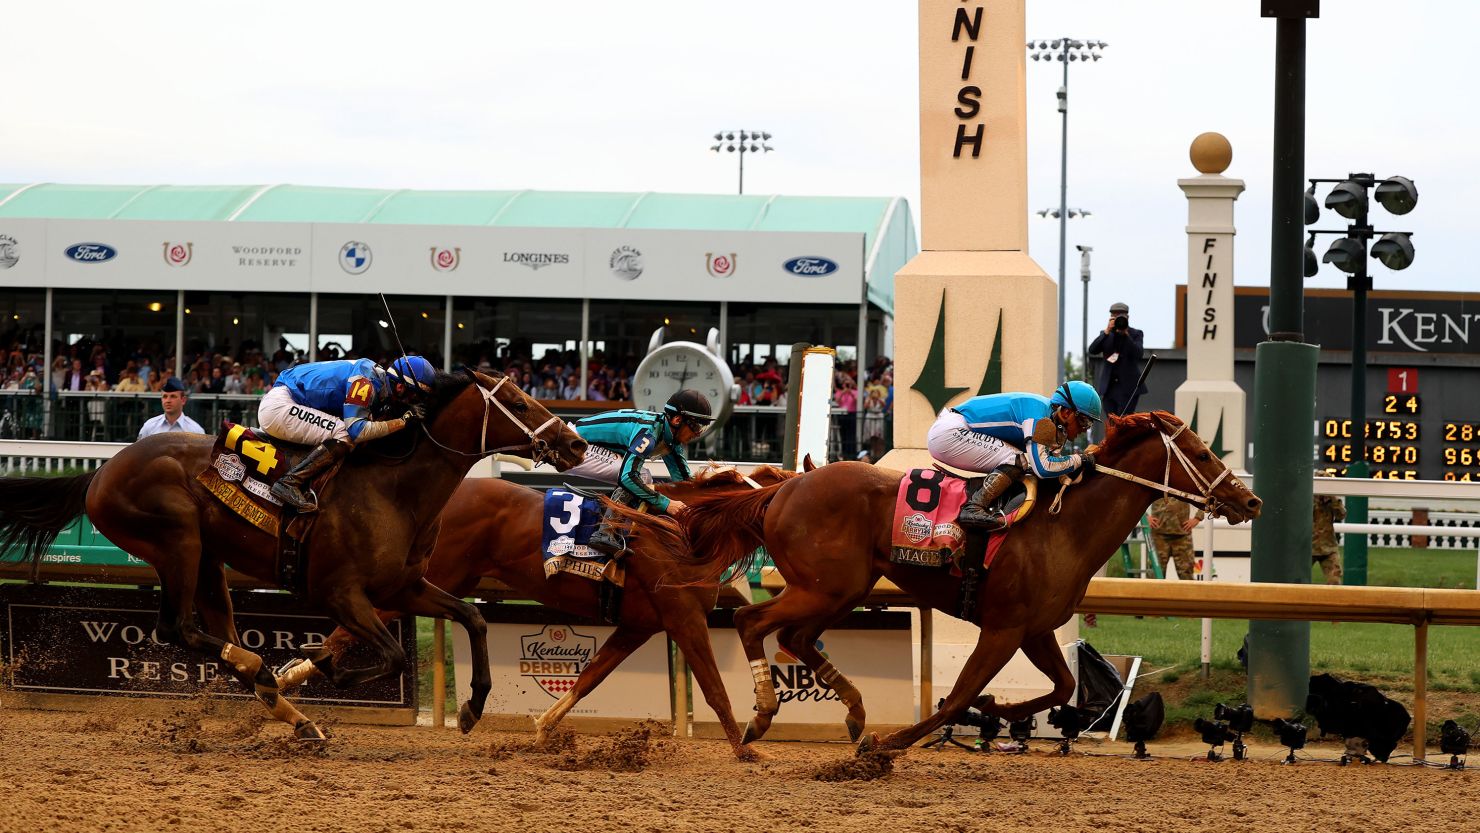 Kentucky Derby Mage crosses finish line first CNN